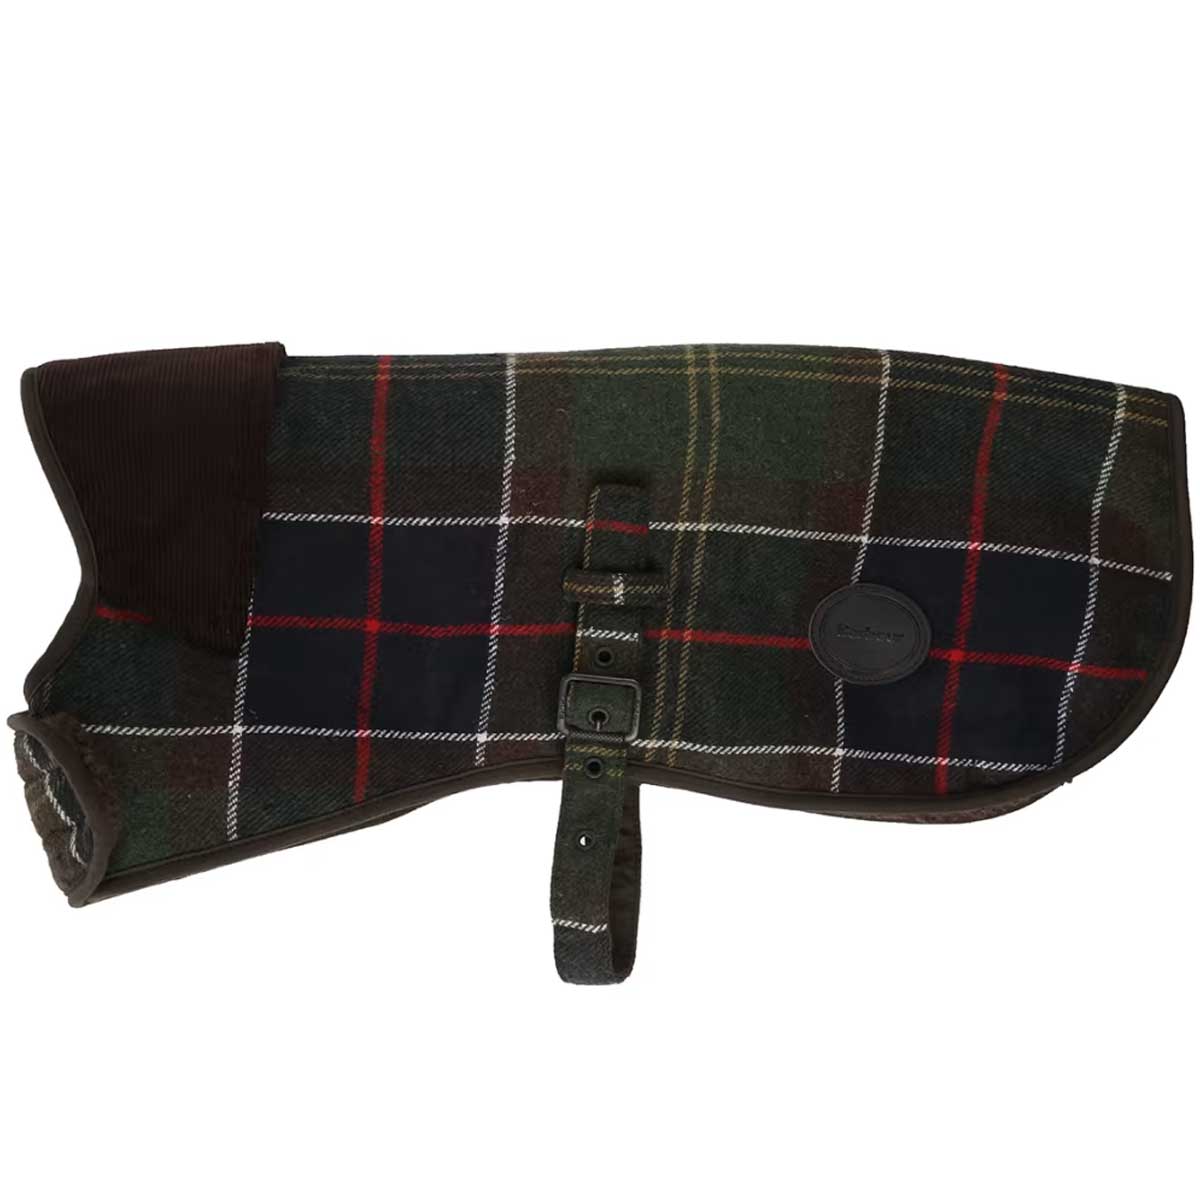 BARBOUR Wool Touch Dog Coat - Classic Tartan